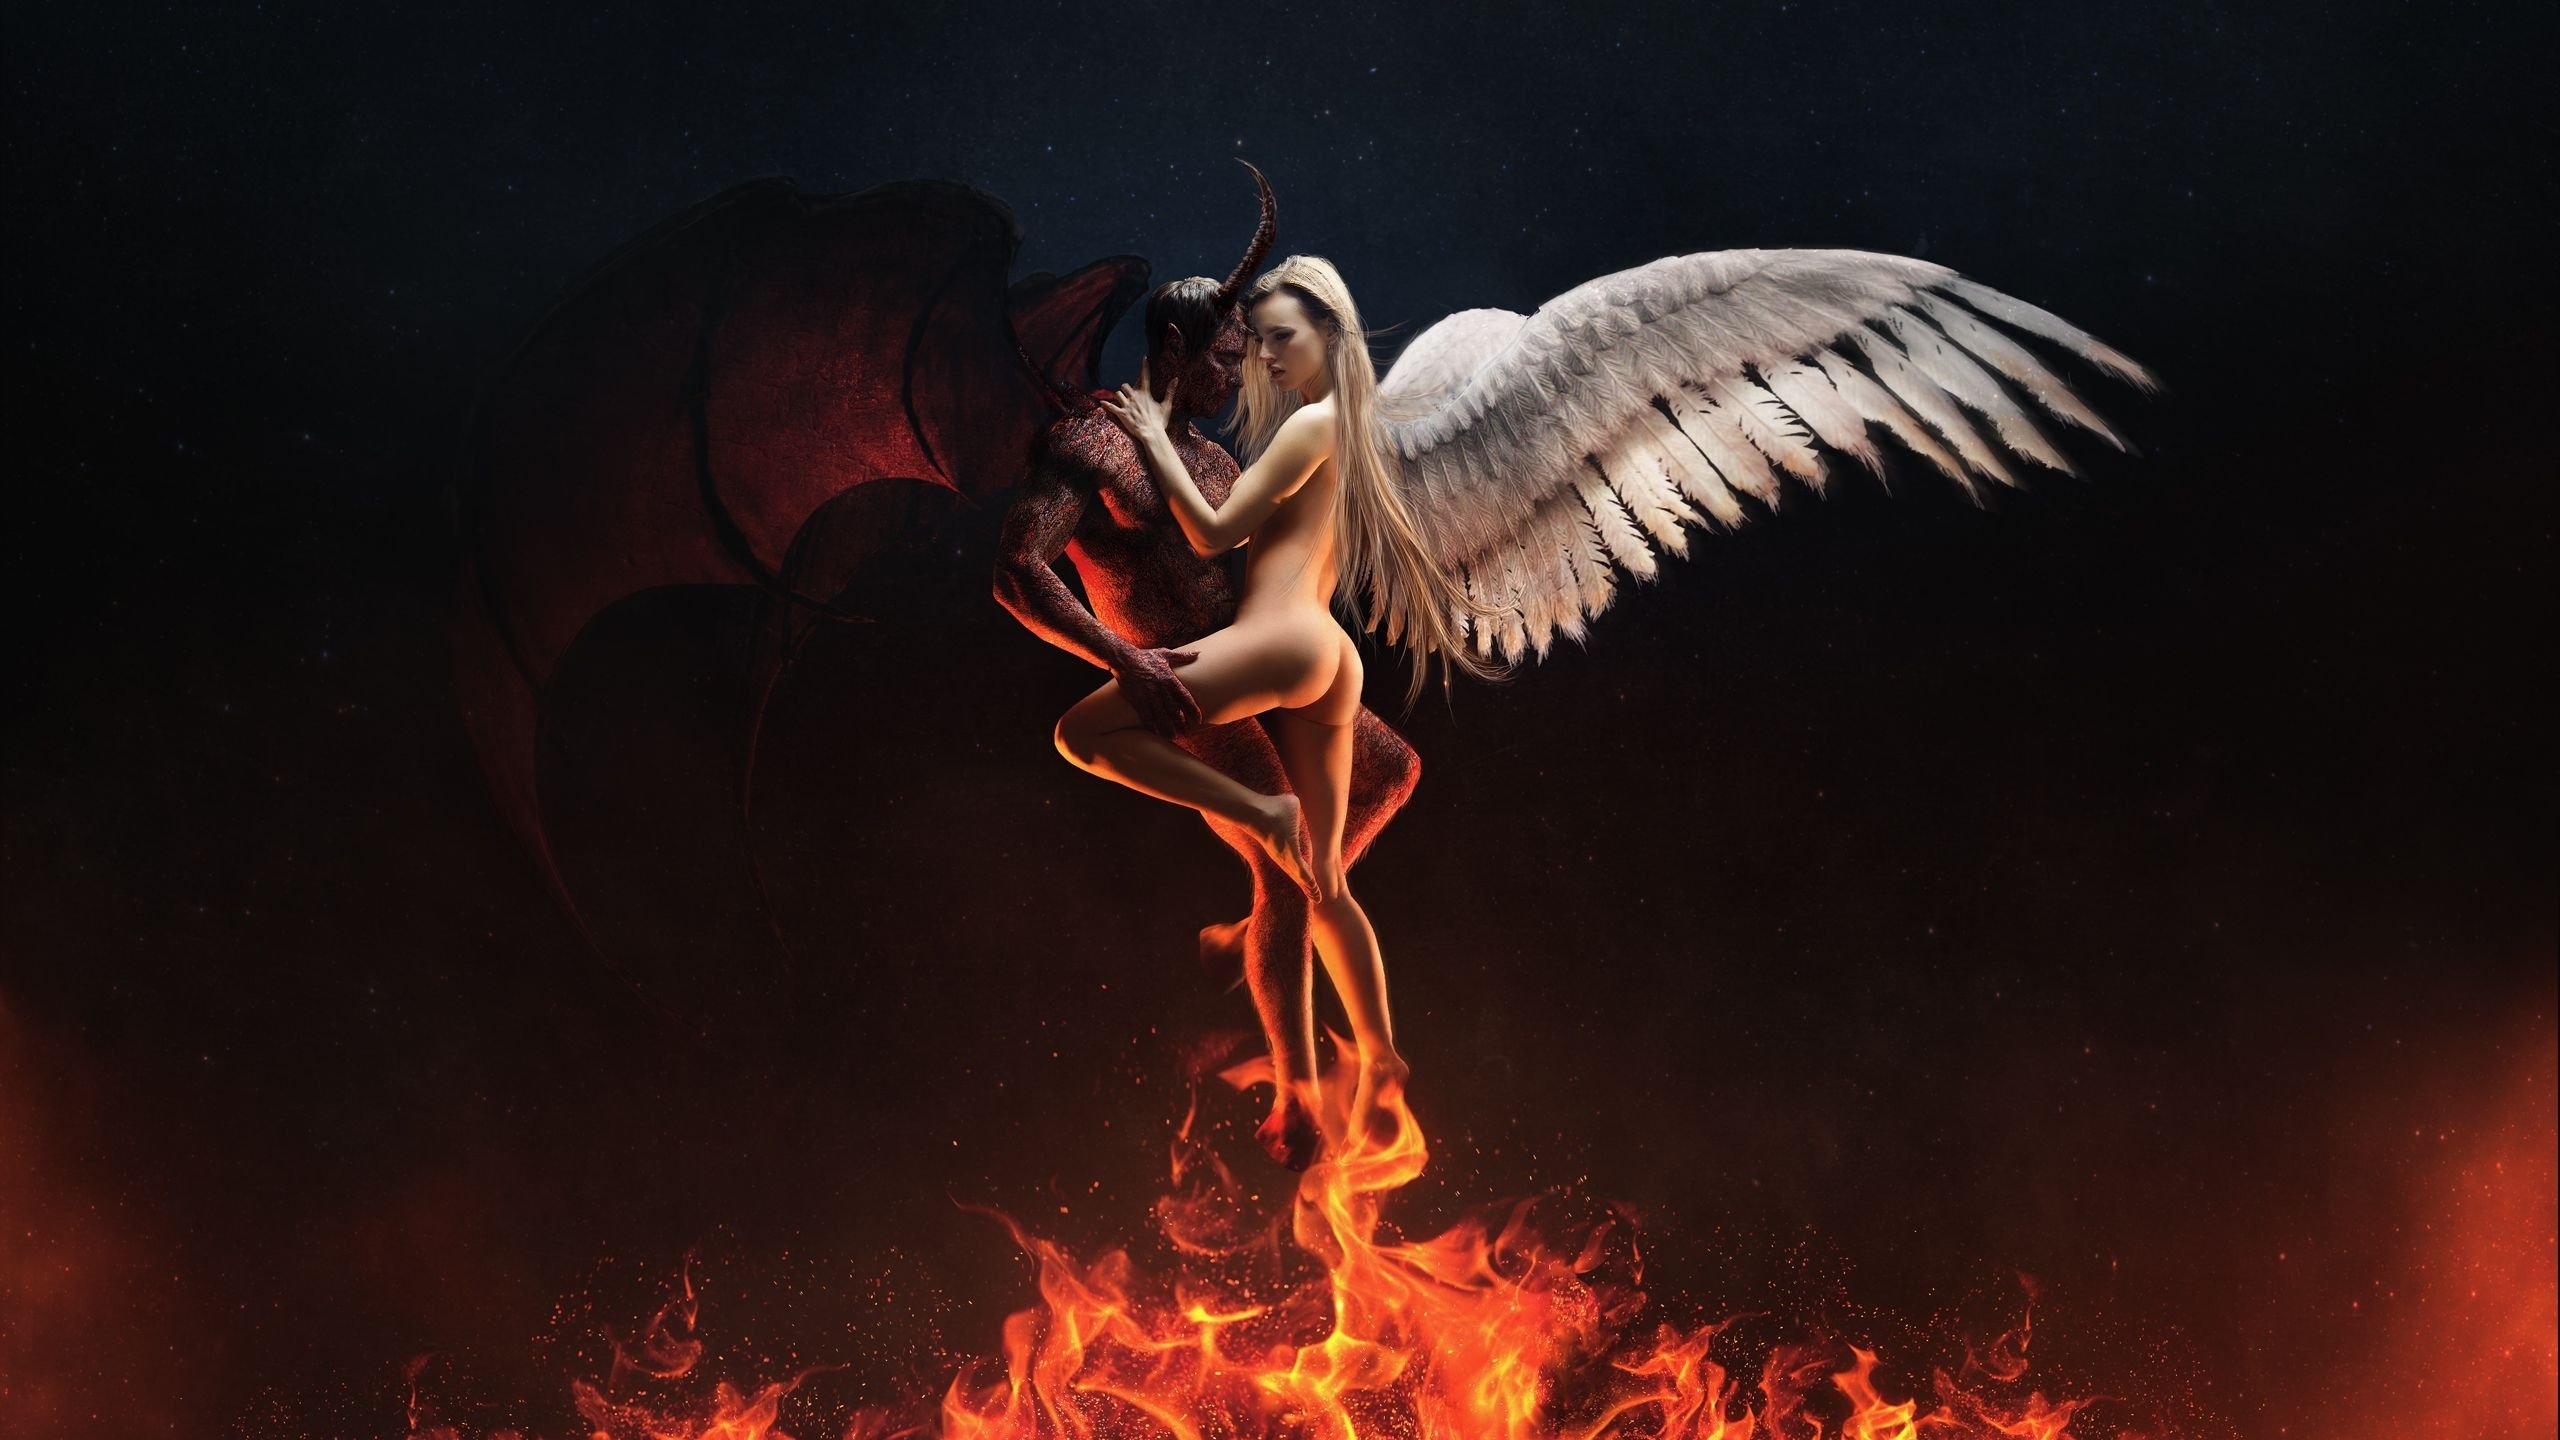 Devil and angel pictures